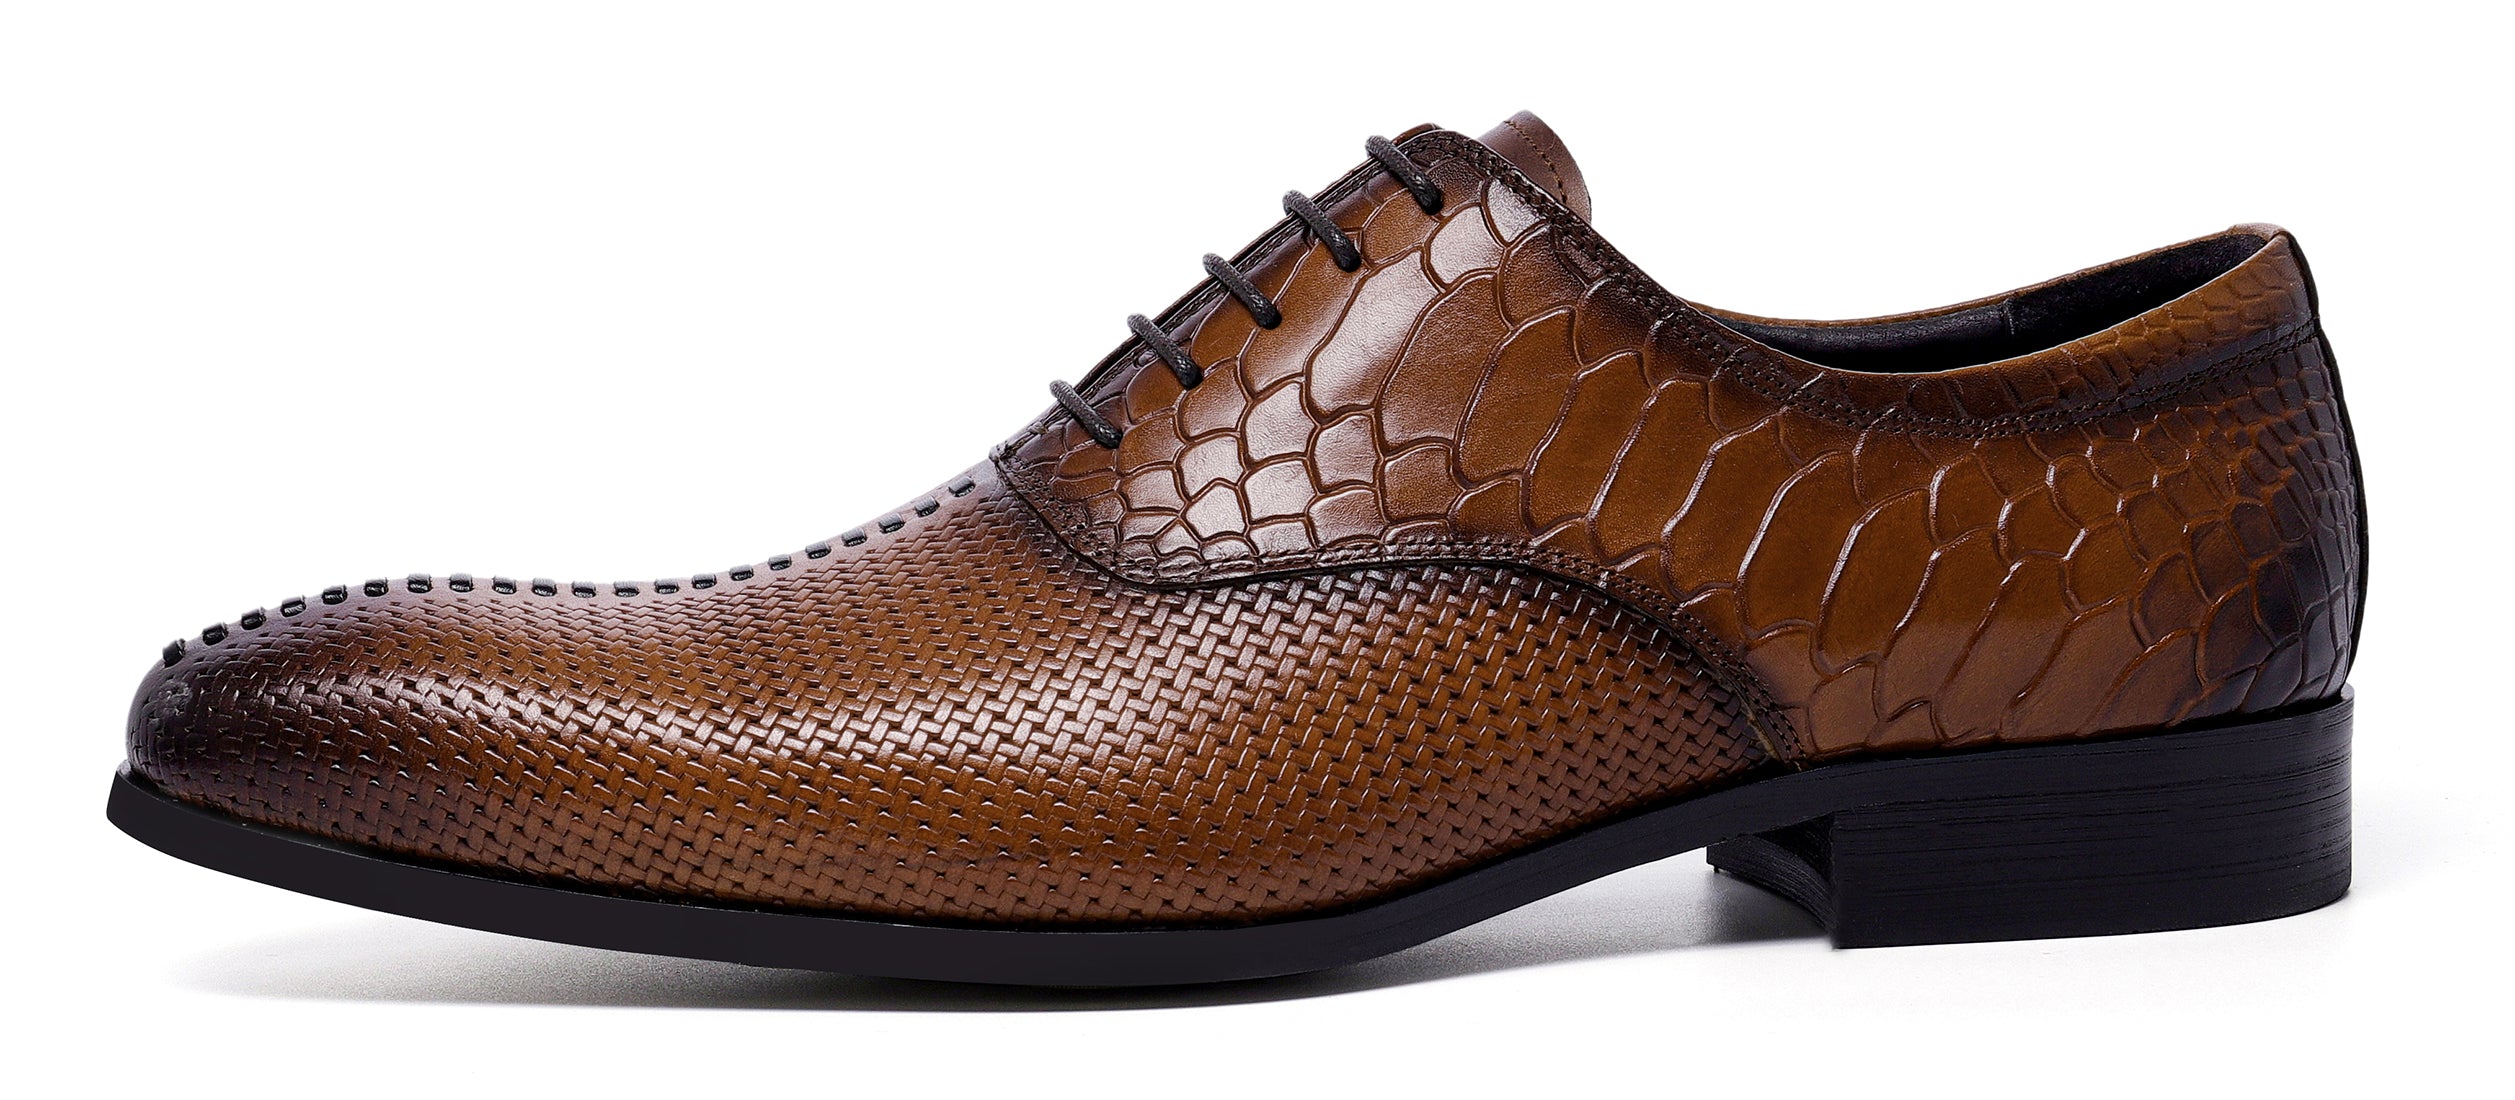 Men's Formal Leather Woven Oxfords